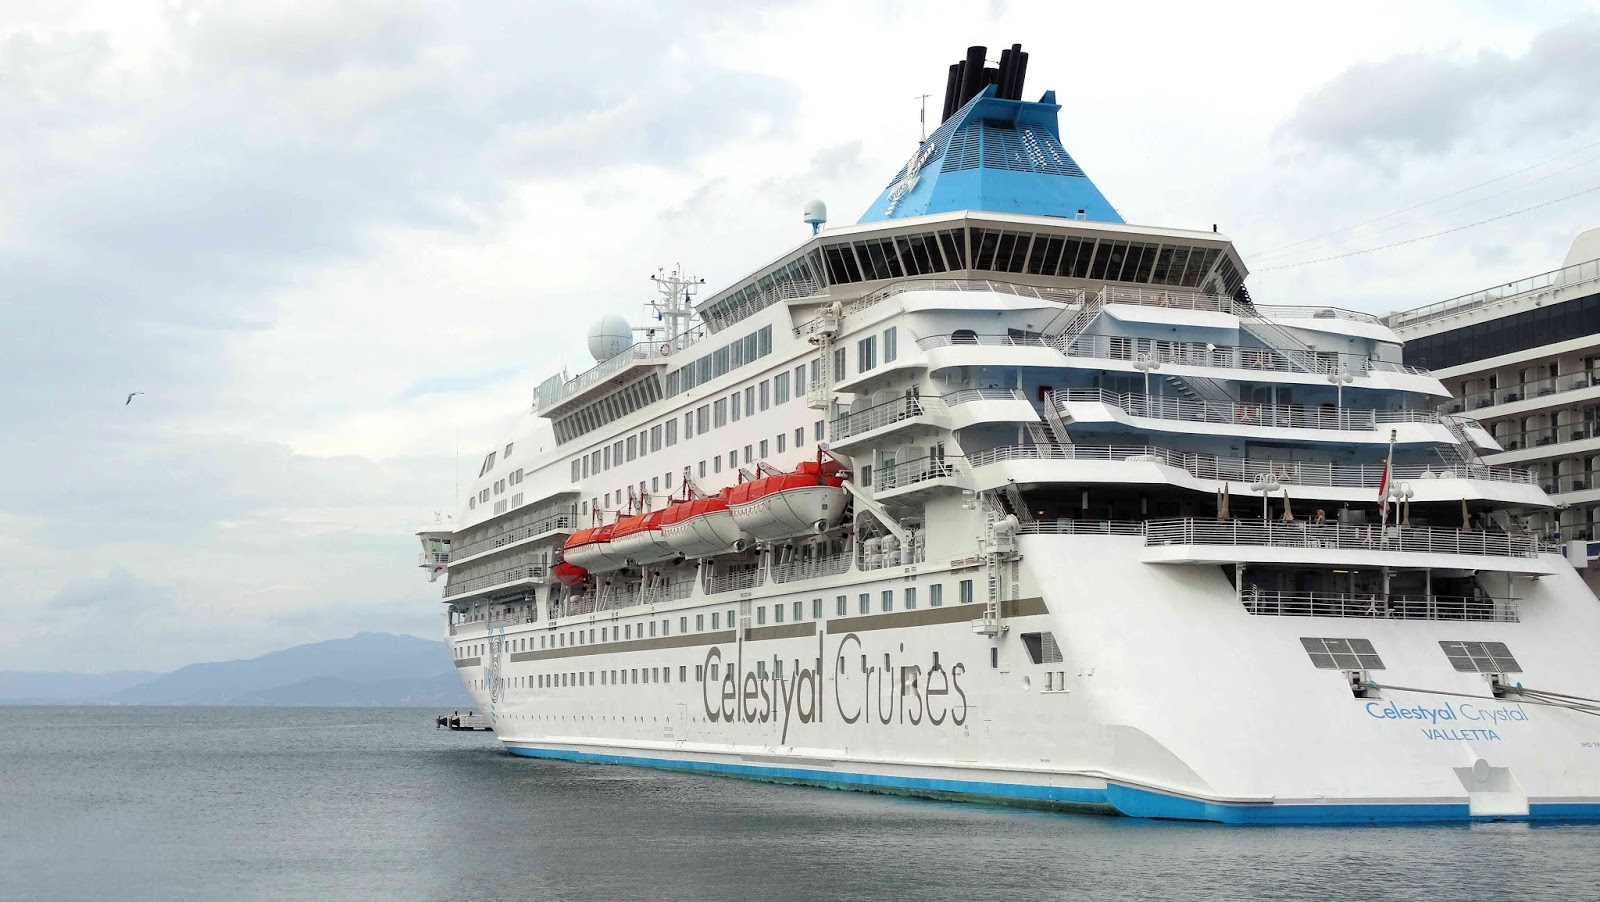 celestyal cruise 3 continents review